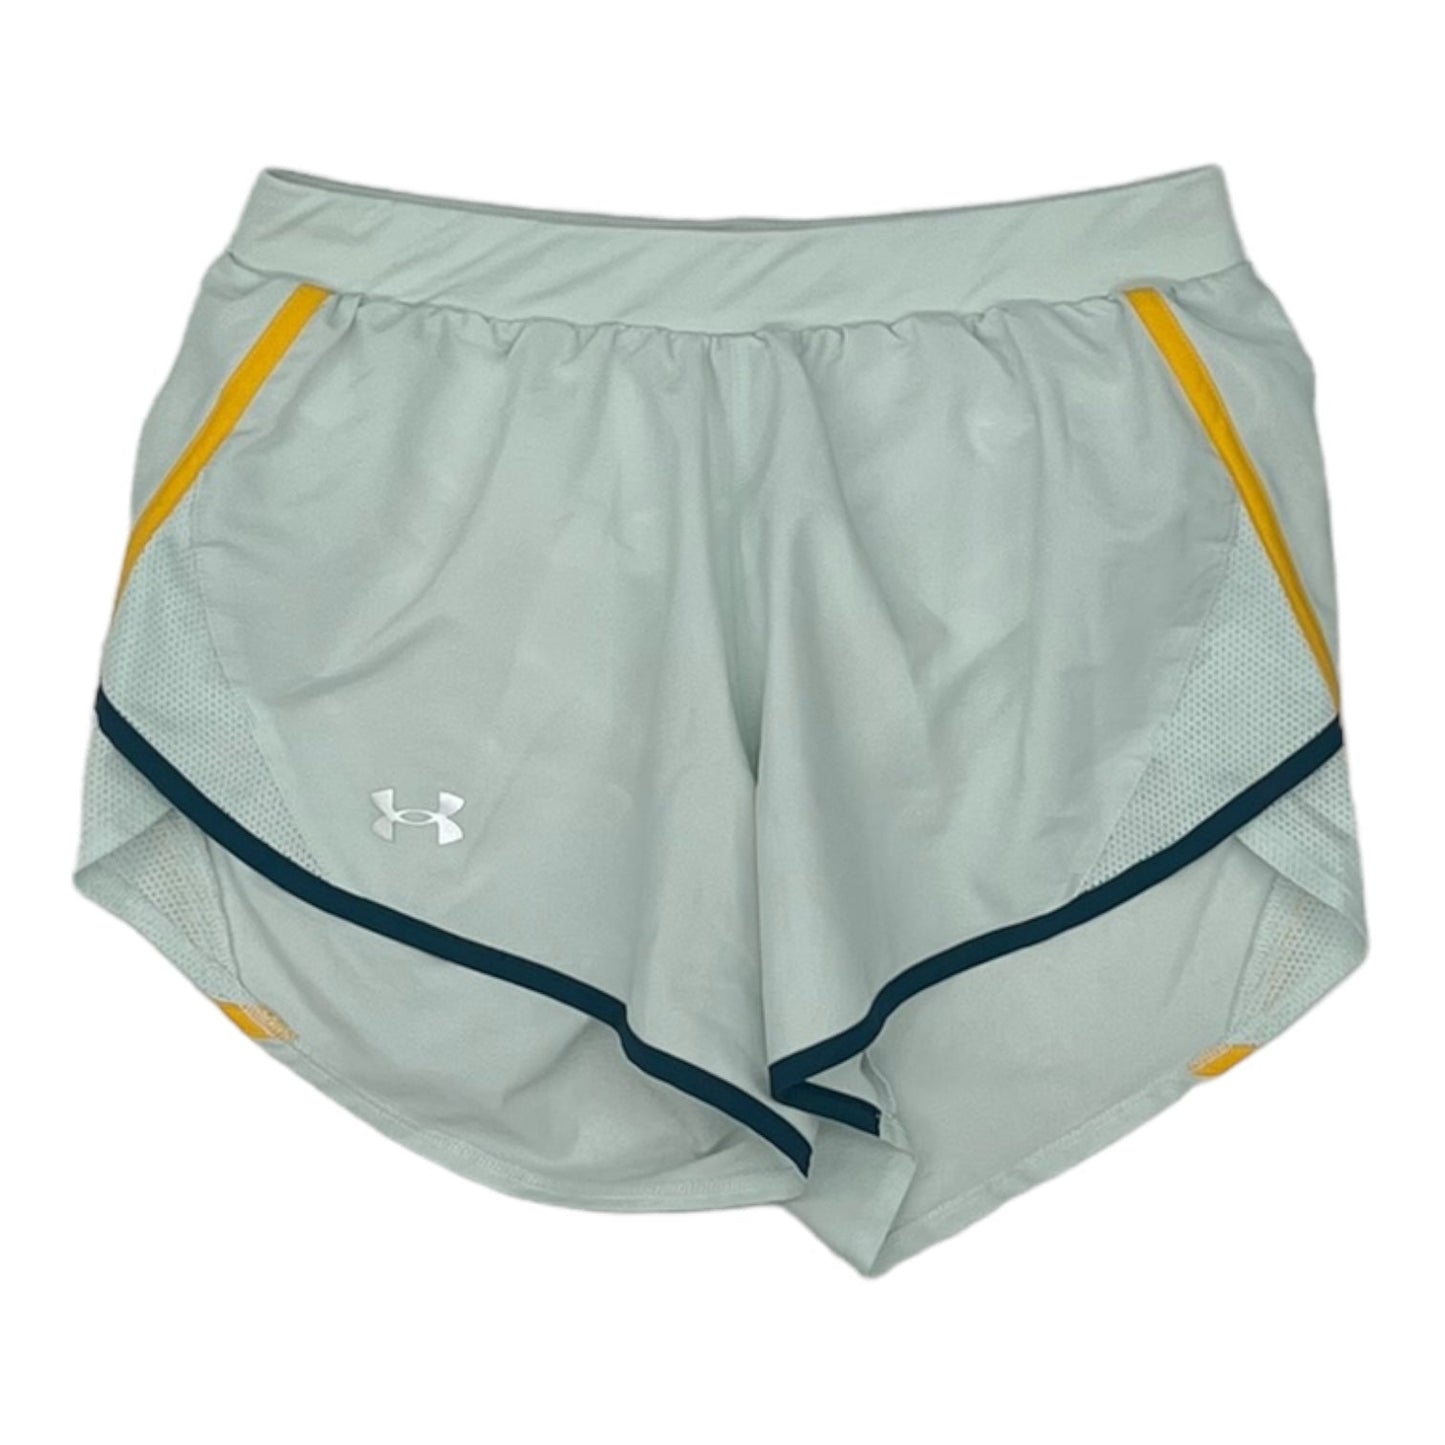 Green Athletic Shorts Under Armour, Size Xs